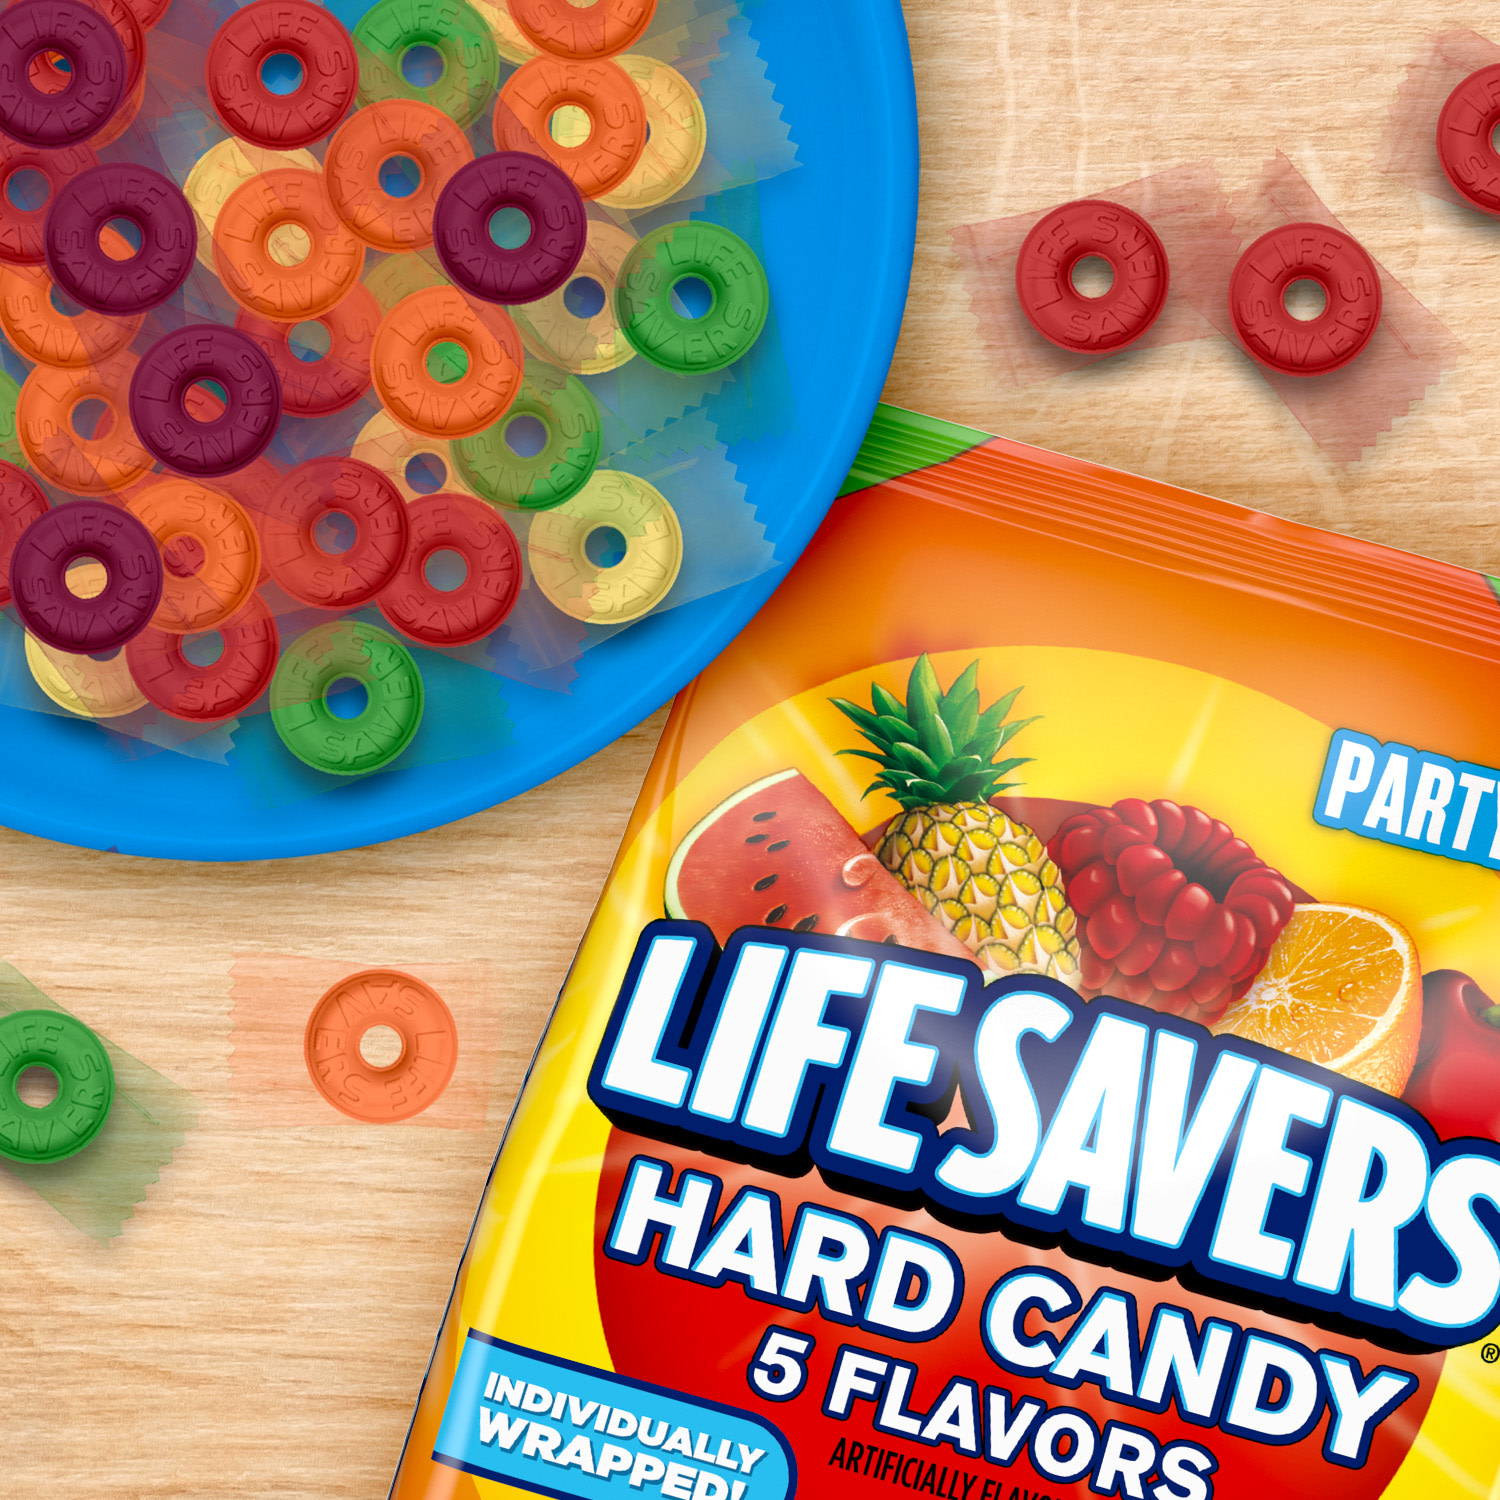 Life Savers 5 Flavors Hard Candy, Party Size - 50 oz Bag - image 5 of 14